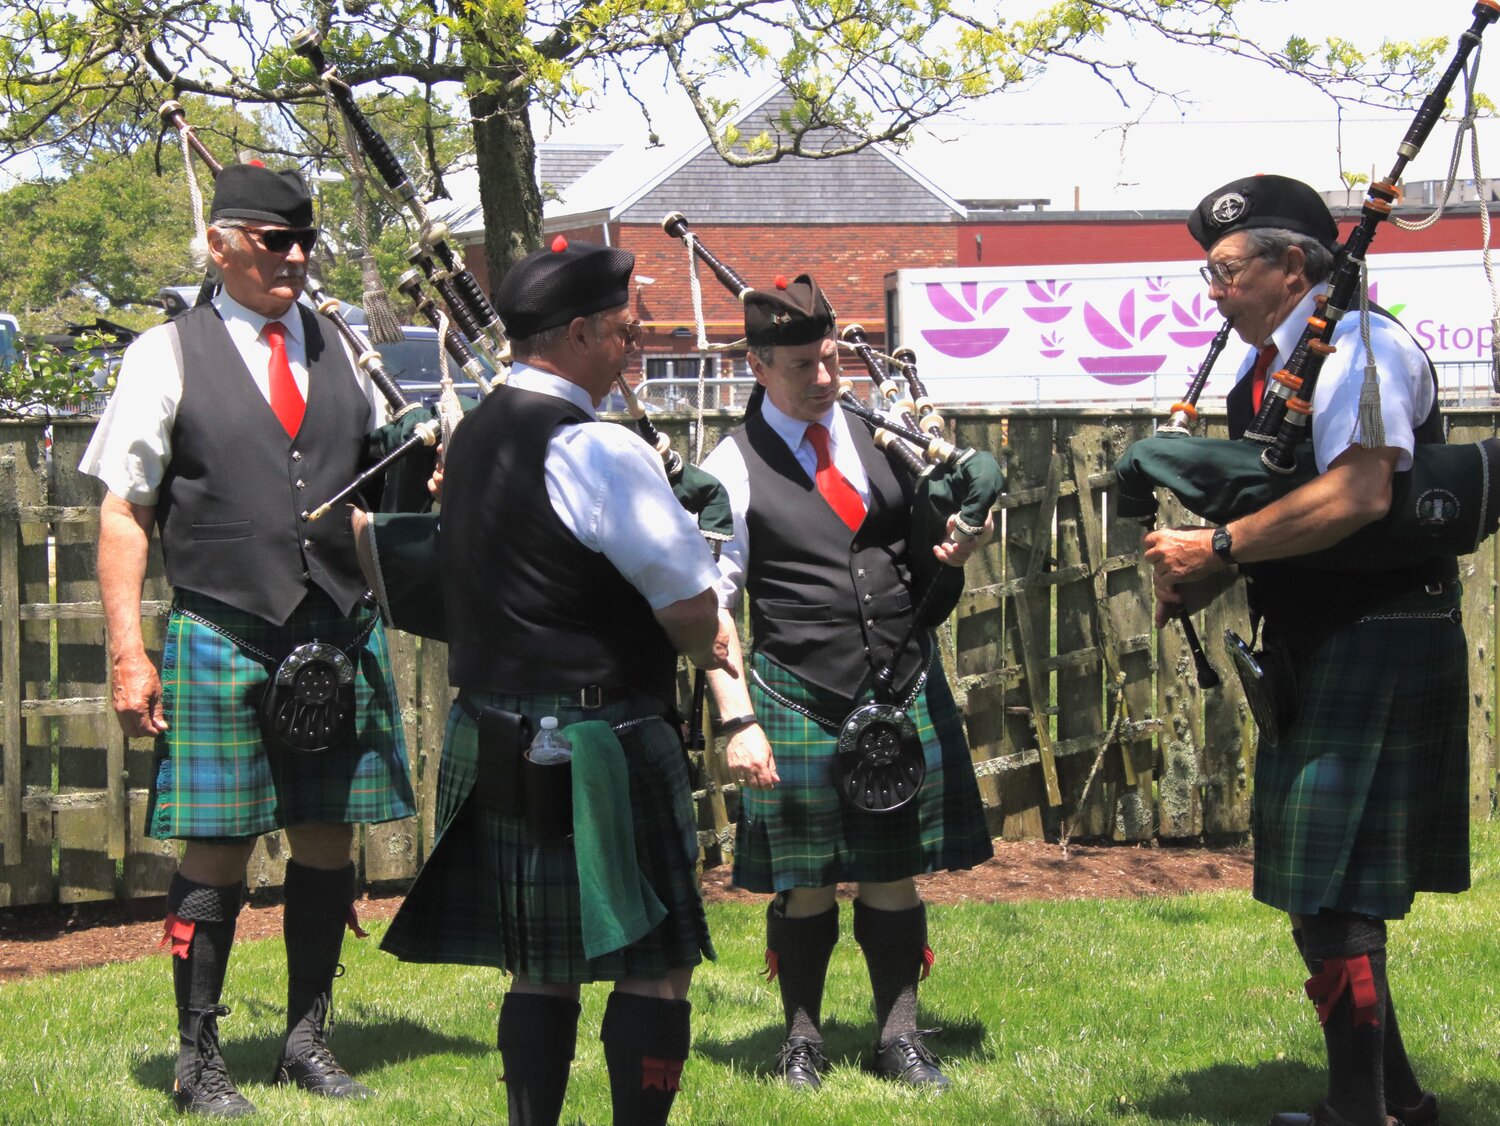 Bagpipers from the Highland Light Scottish Pipe Band.